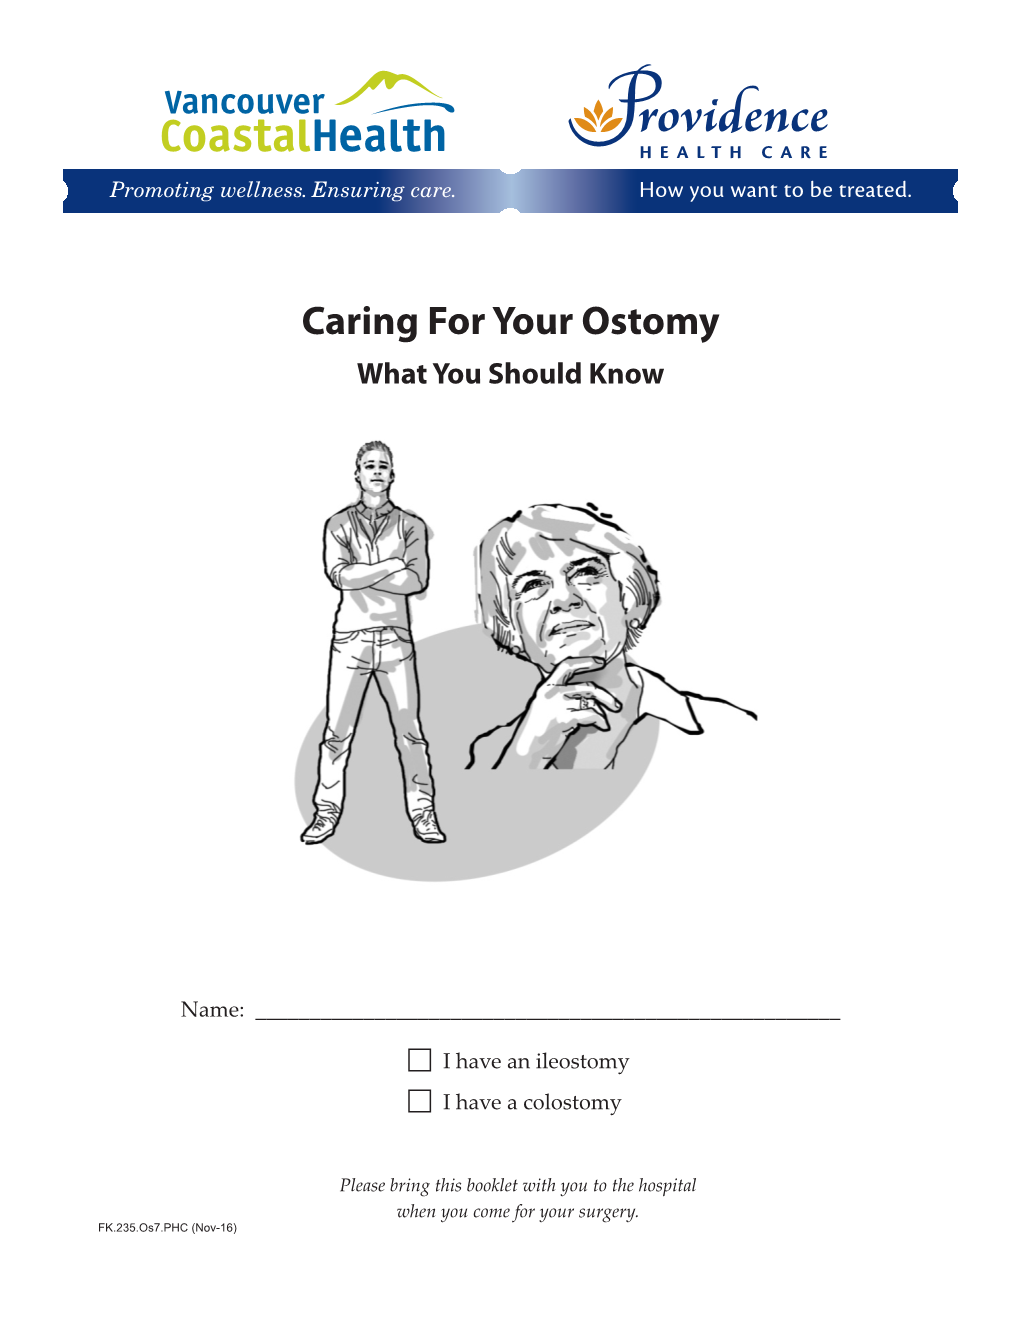 Caring for Your Ostomy What You Should Know